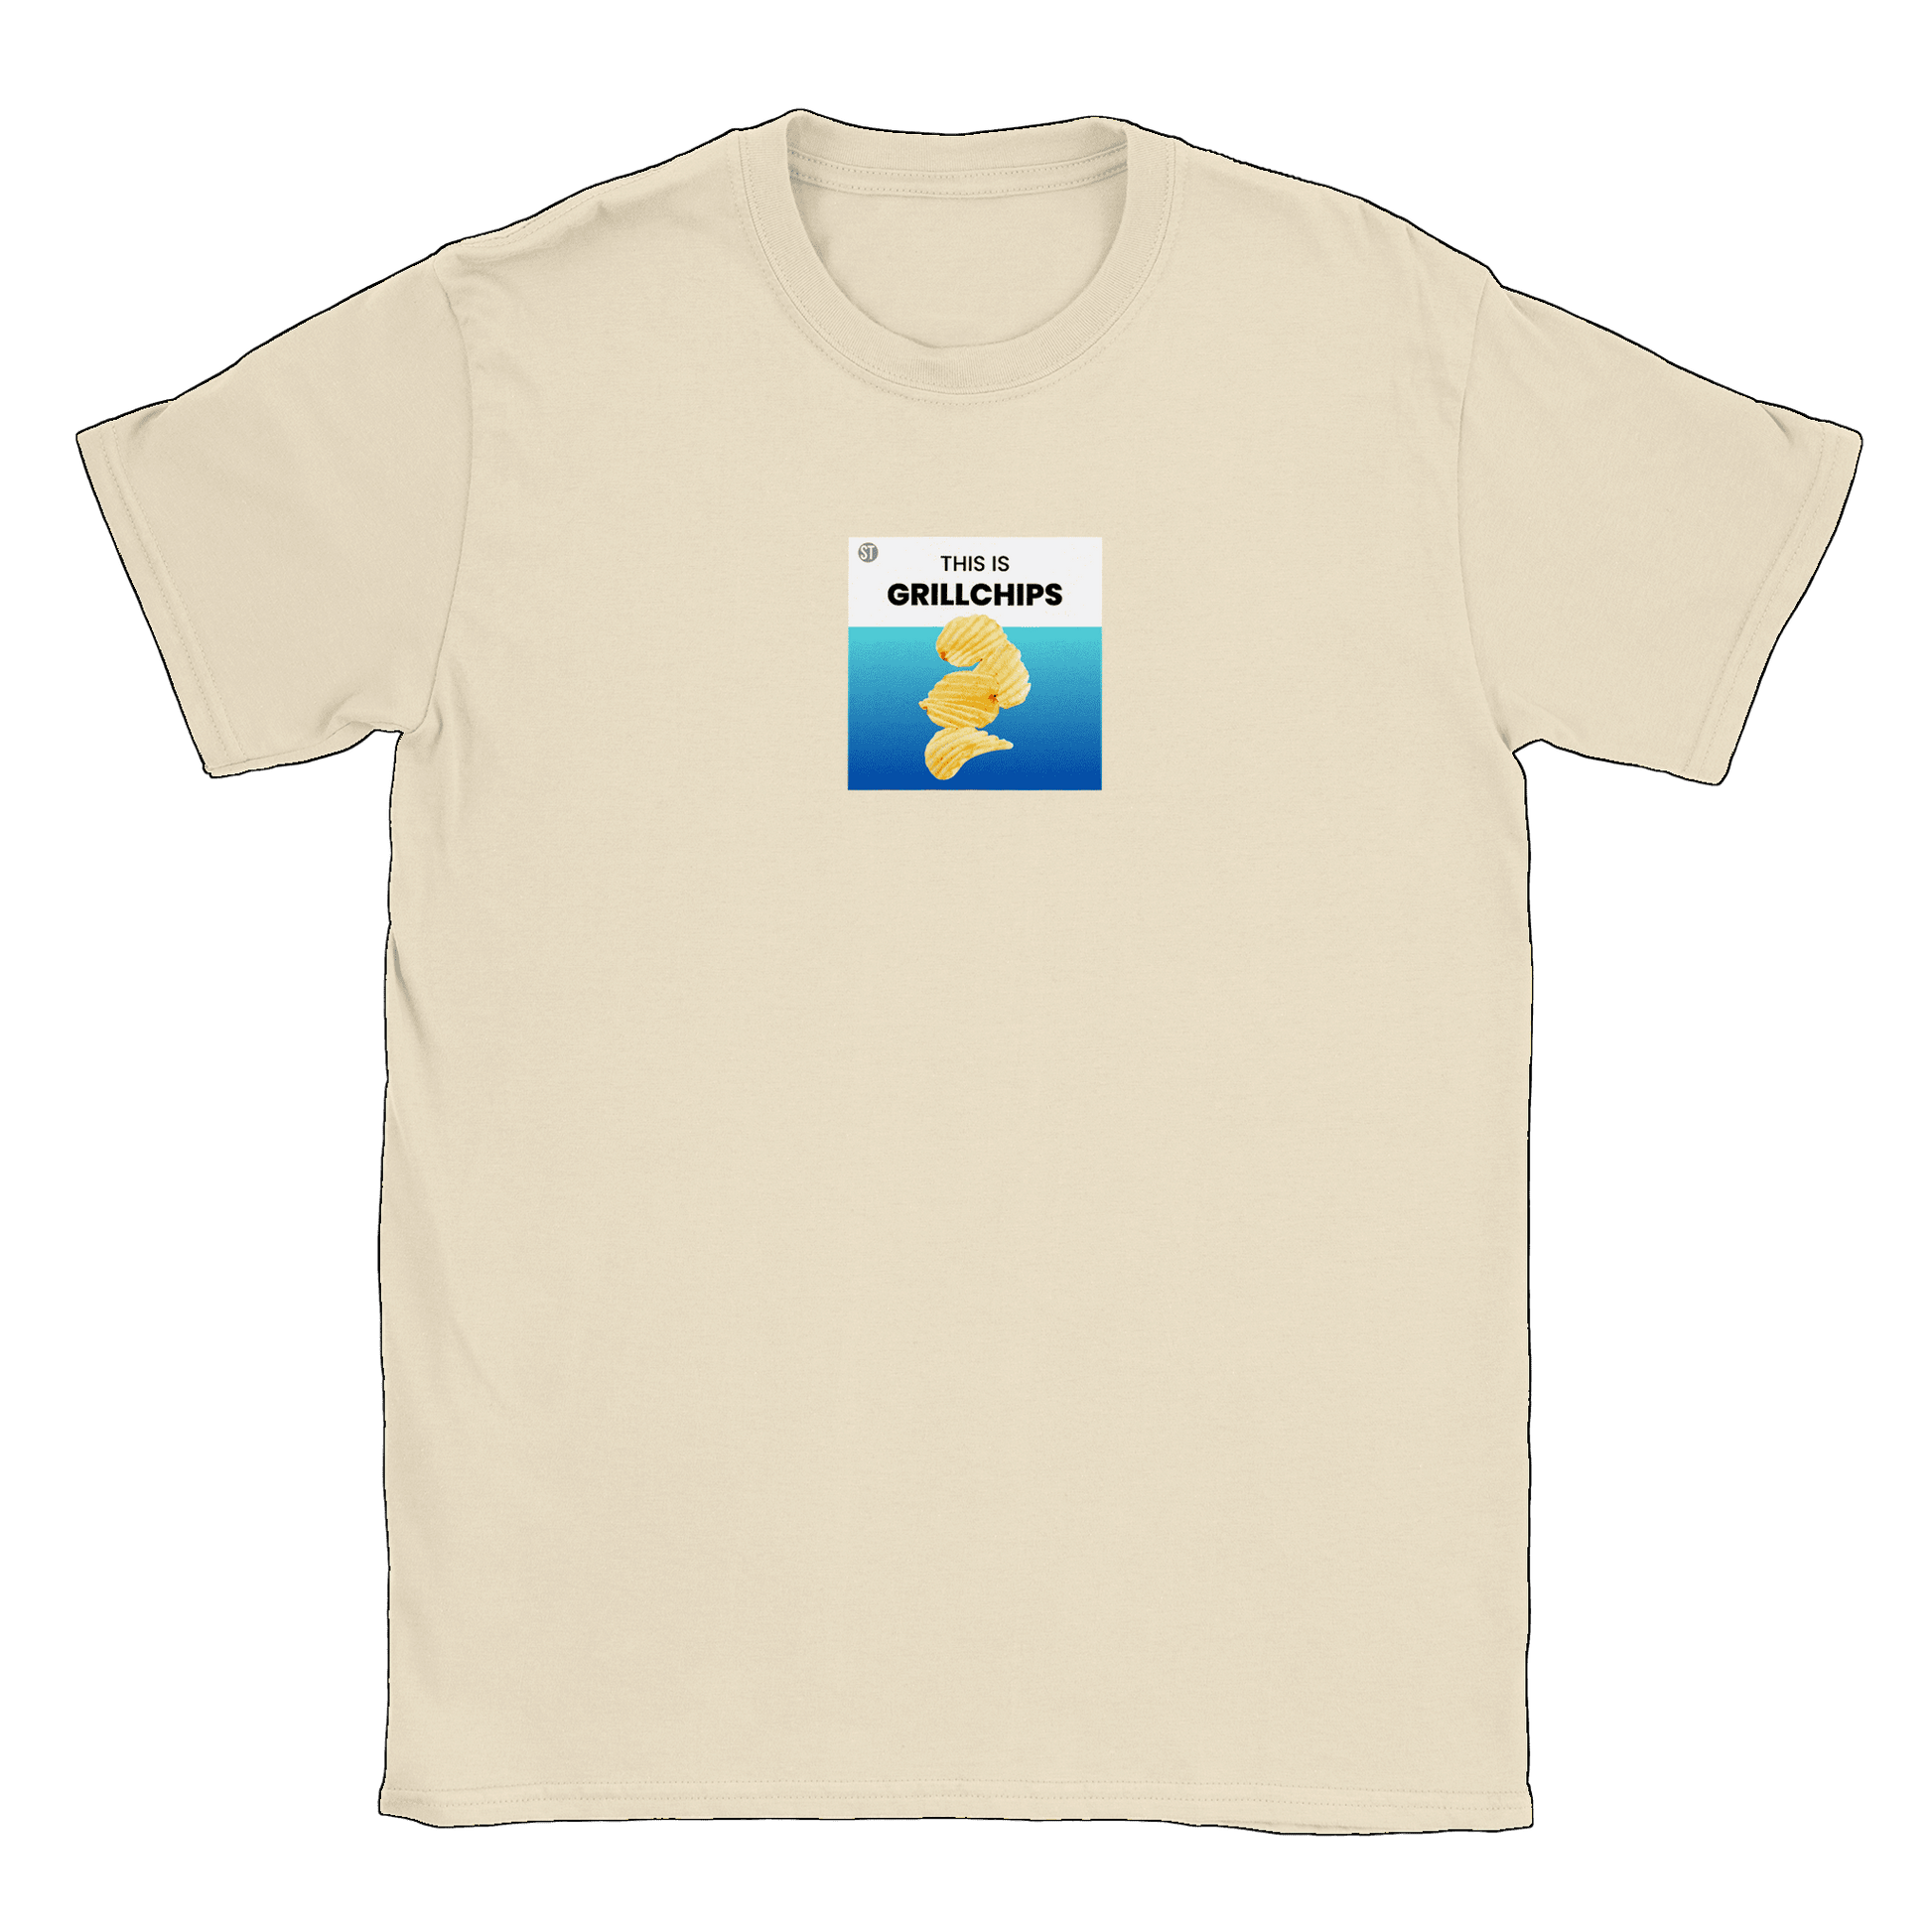 This is Grillchips - T-shirt Natural